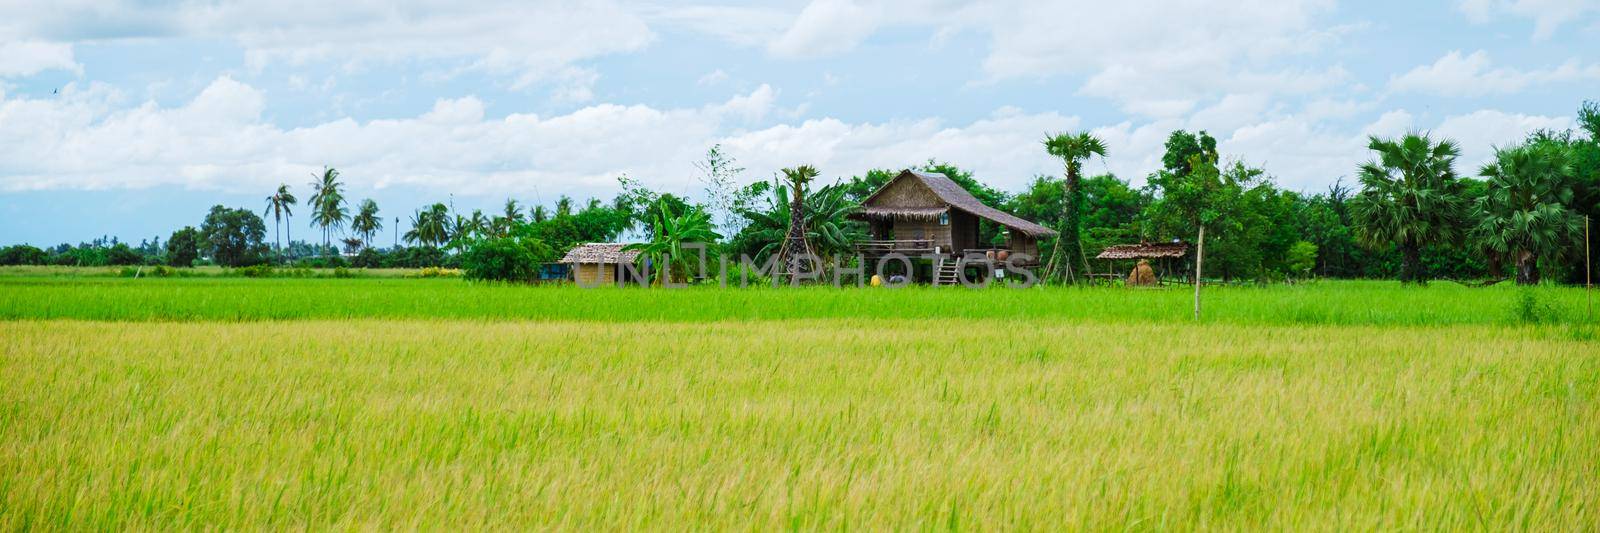 Eco farm homestay with a rice field in central Thailand, paddy field of rice during rain monsoon by fokkebok